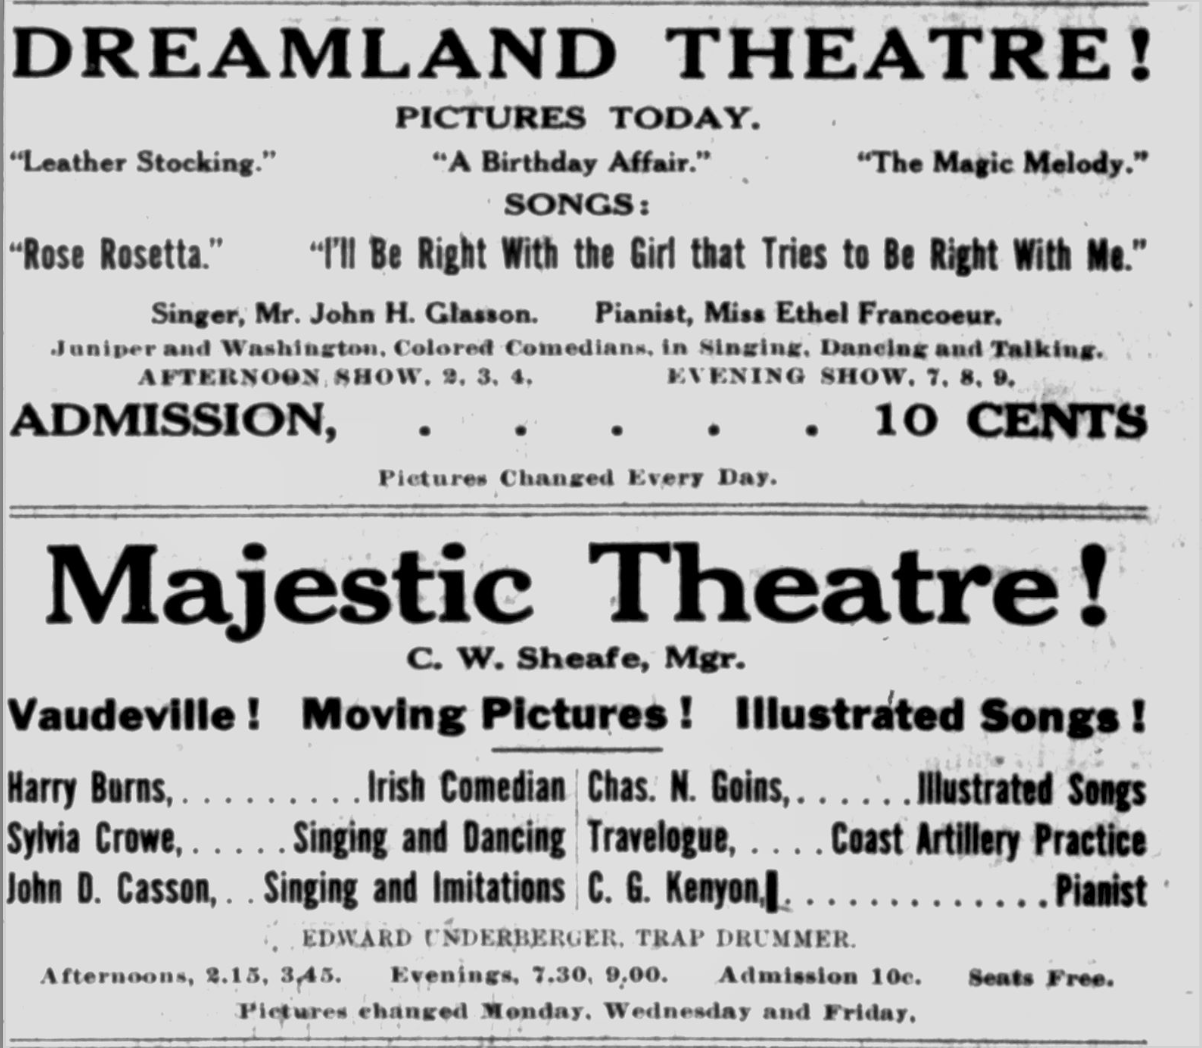 Advertisement for Charles N. Goins' performance at the Majestic Theatre and Juniper and Washington's performance at the Dreamland Theatre